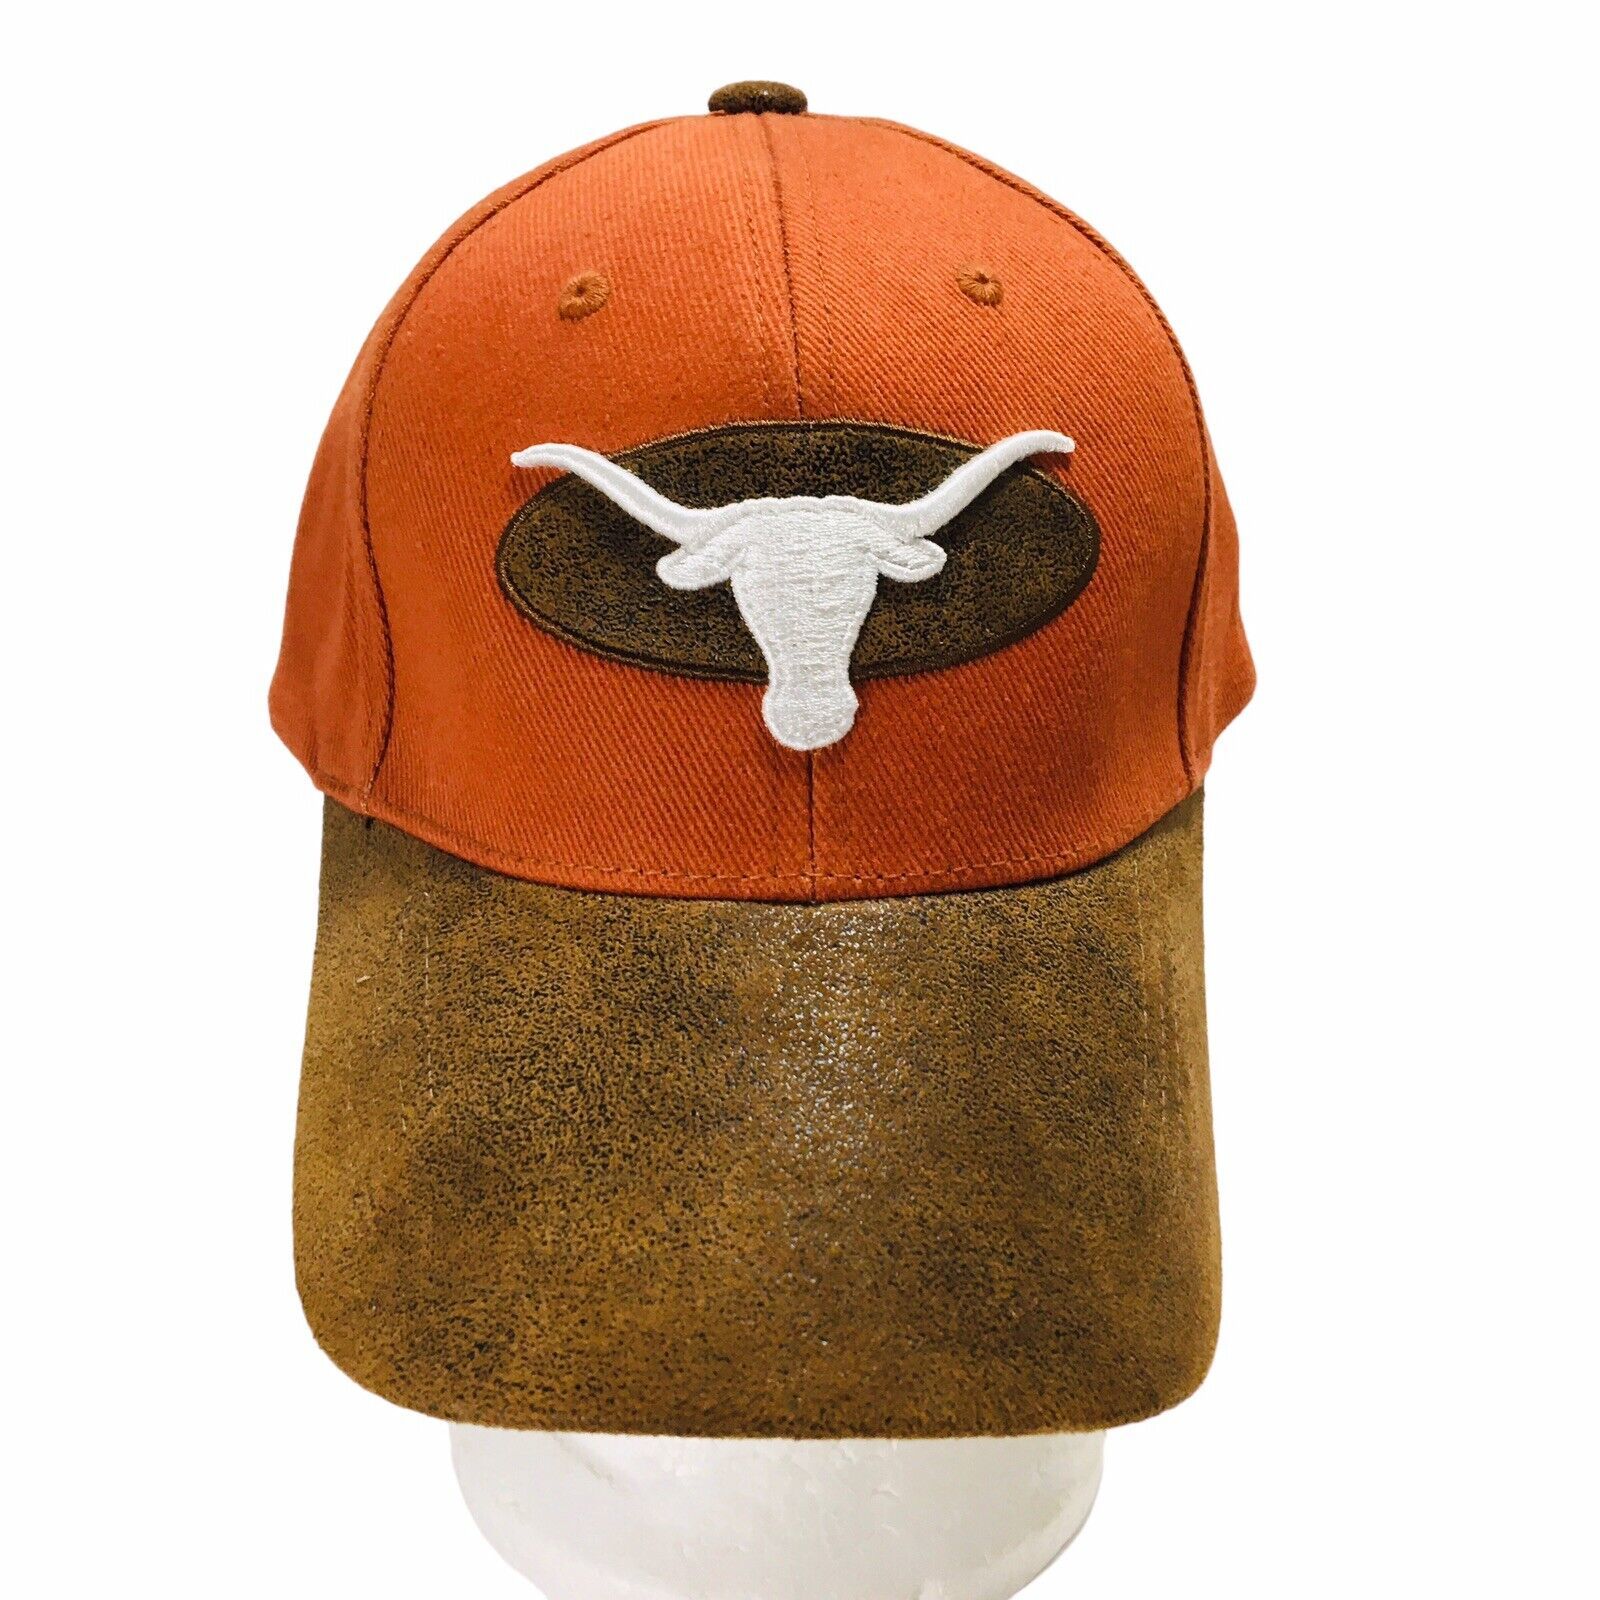 NWT VTG 90s Texas Longhorns Suede Bill T.E.I. Strapback Spell-out Hat Cap 1995 - $94.99